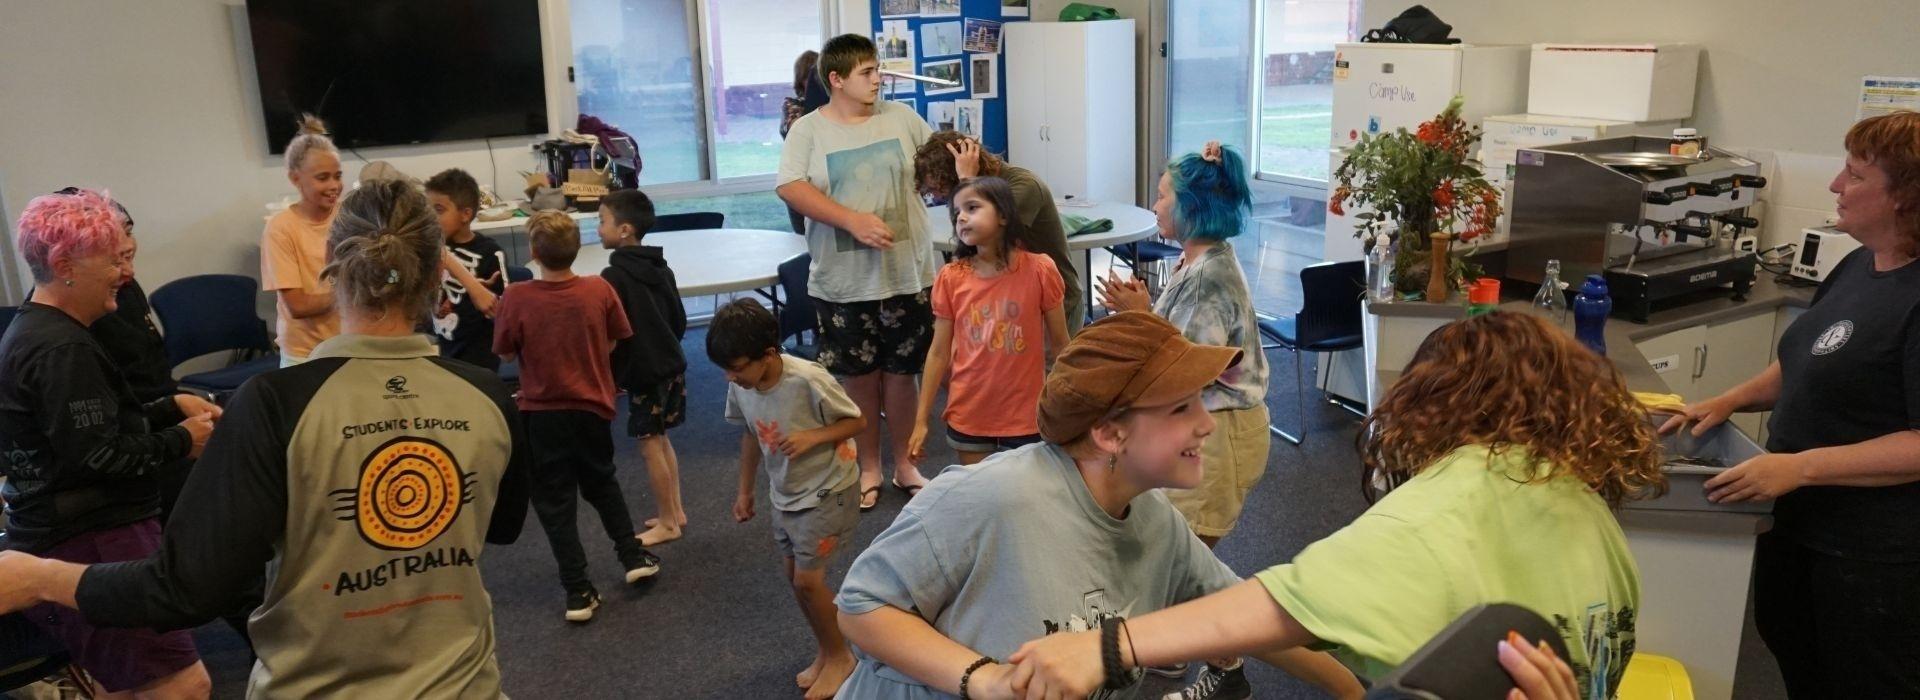 NDIS Participants dancing and having a great time with program facilitators.